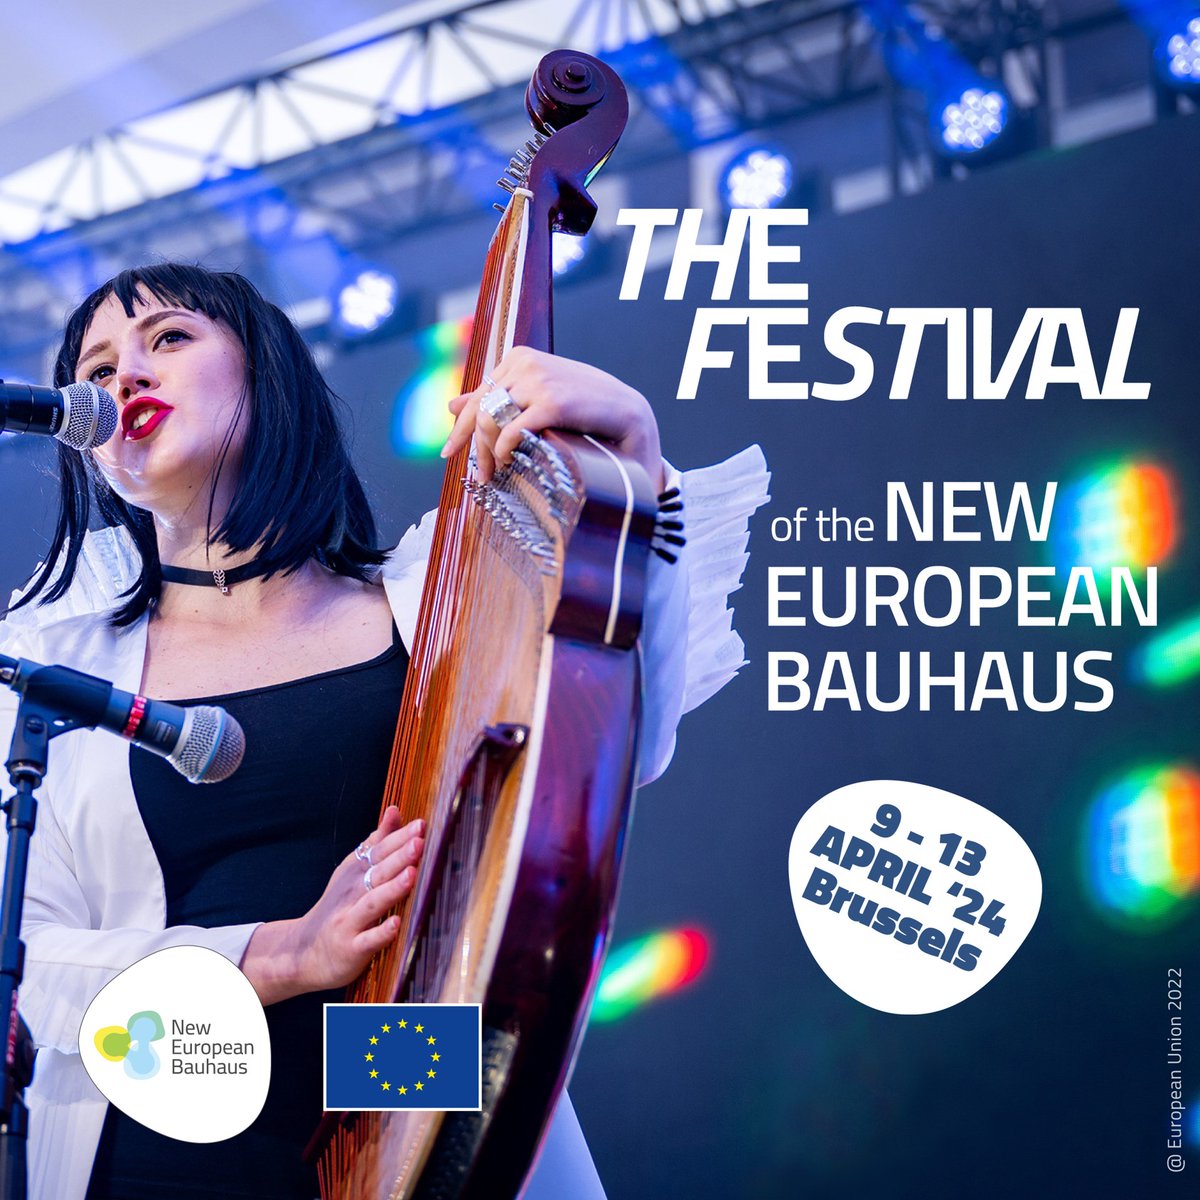 Last call to enjoy #NewEuropeanBauhaus Experienced this springtime Saturday surrounded by art, culture and multiple activities at the @NEBauhaus_FG Festival in Brussels. Check out the program activities➡️ europa.eu/!RrXDmF